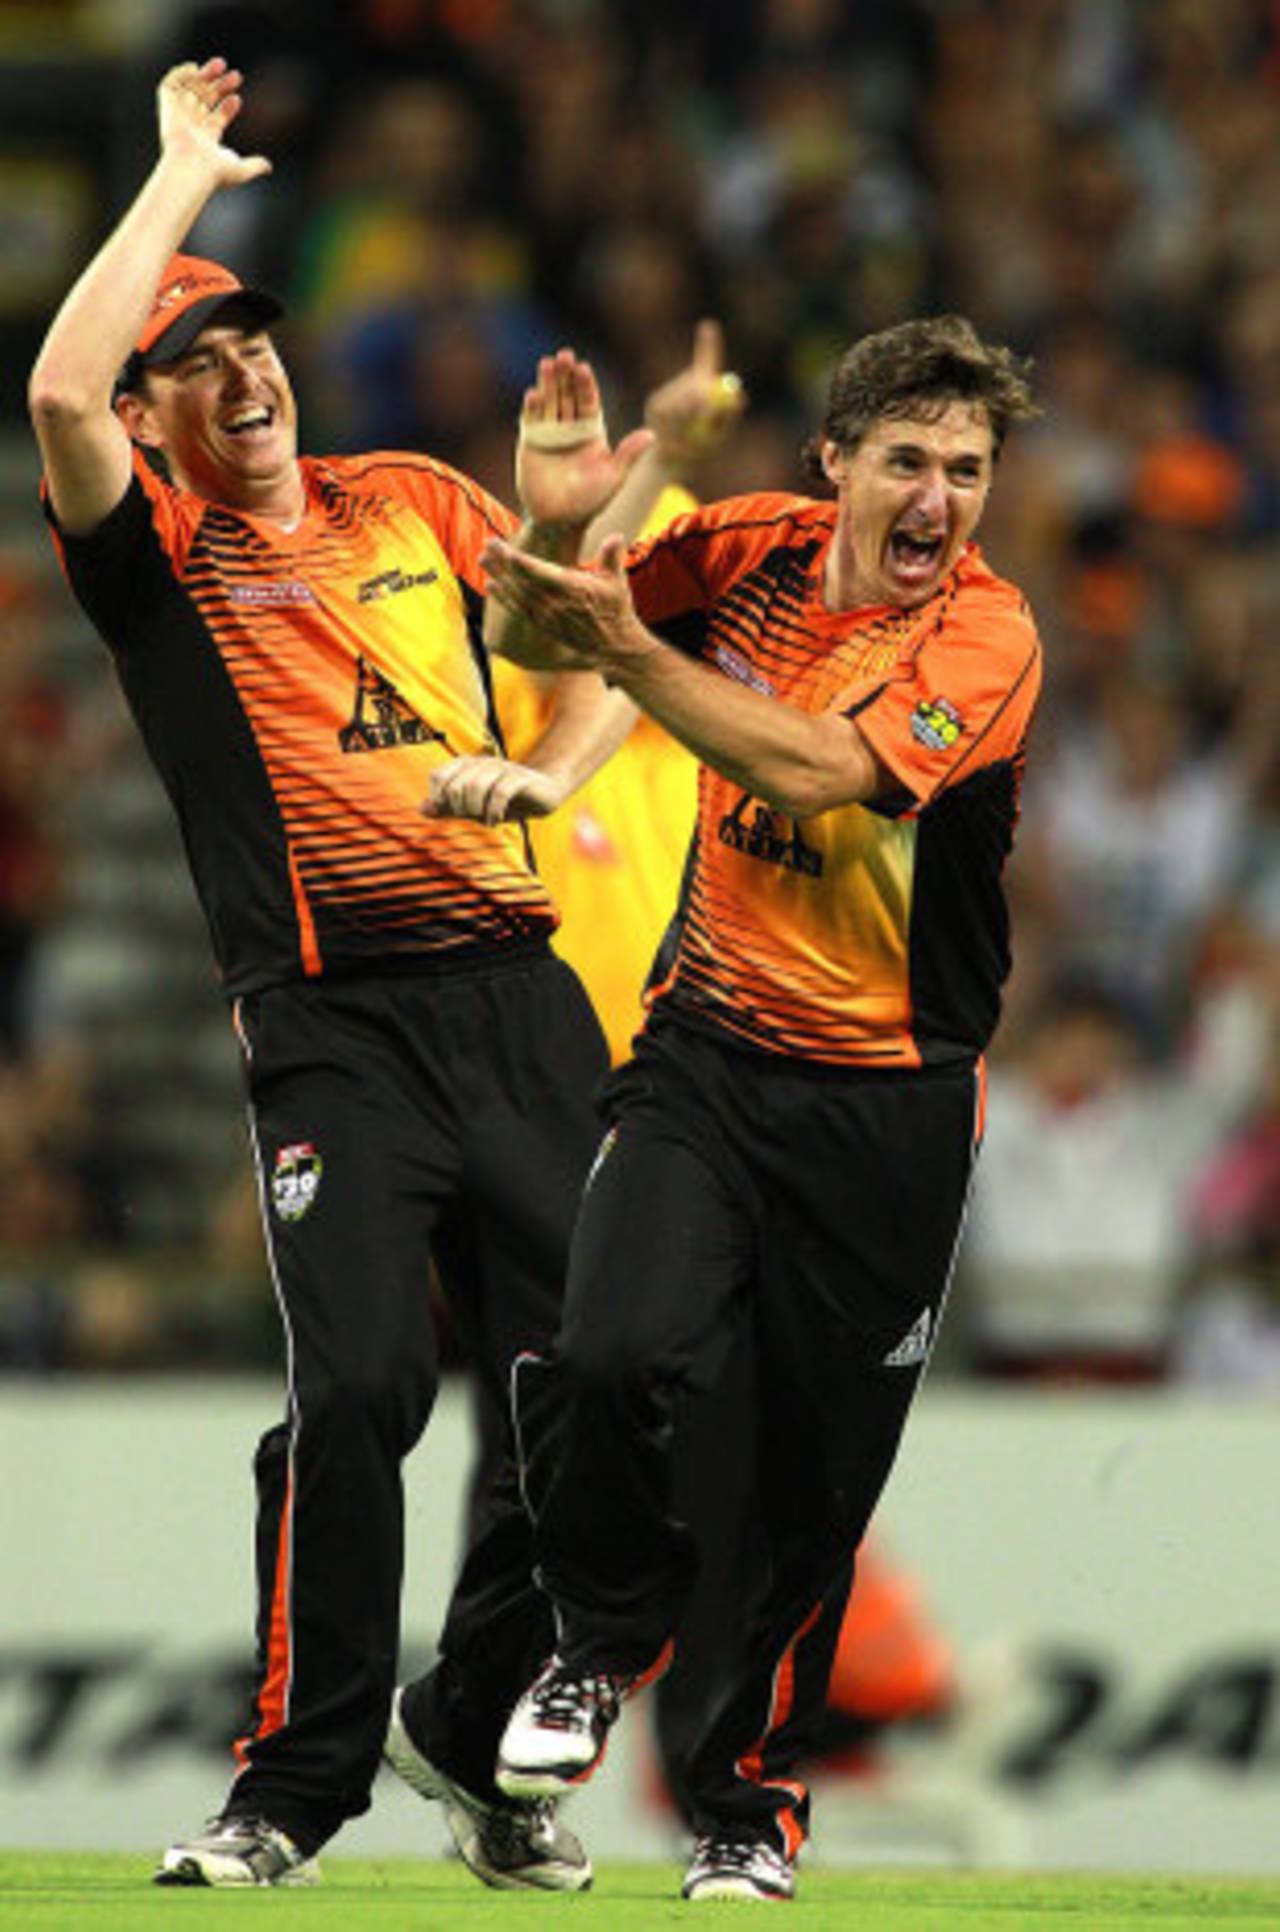 Brad Hogg bowled four red-hot overs for three wickets&nbsp;&nbsp;&bull;&nbsp;&nbsp;Getty Images